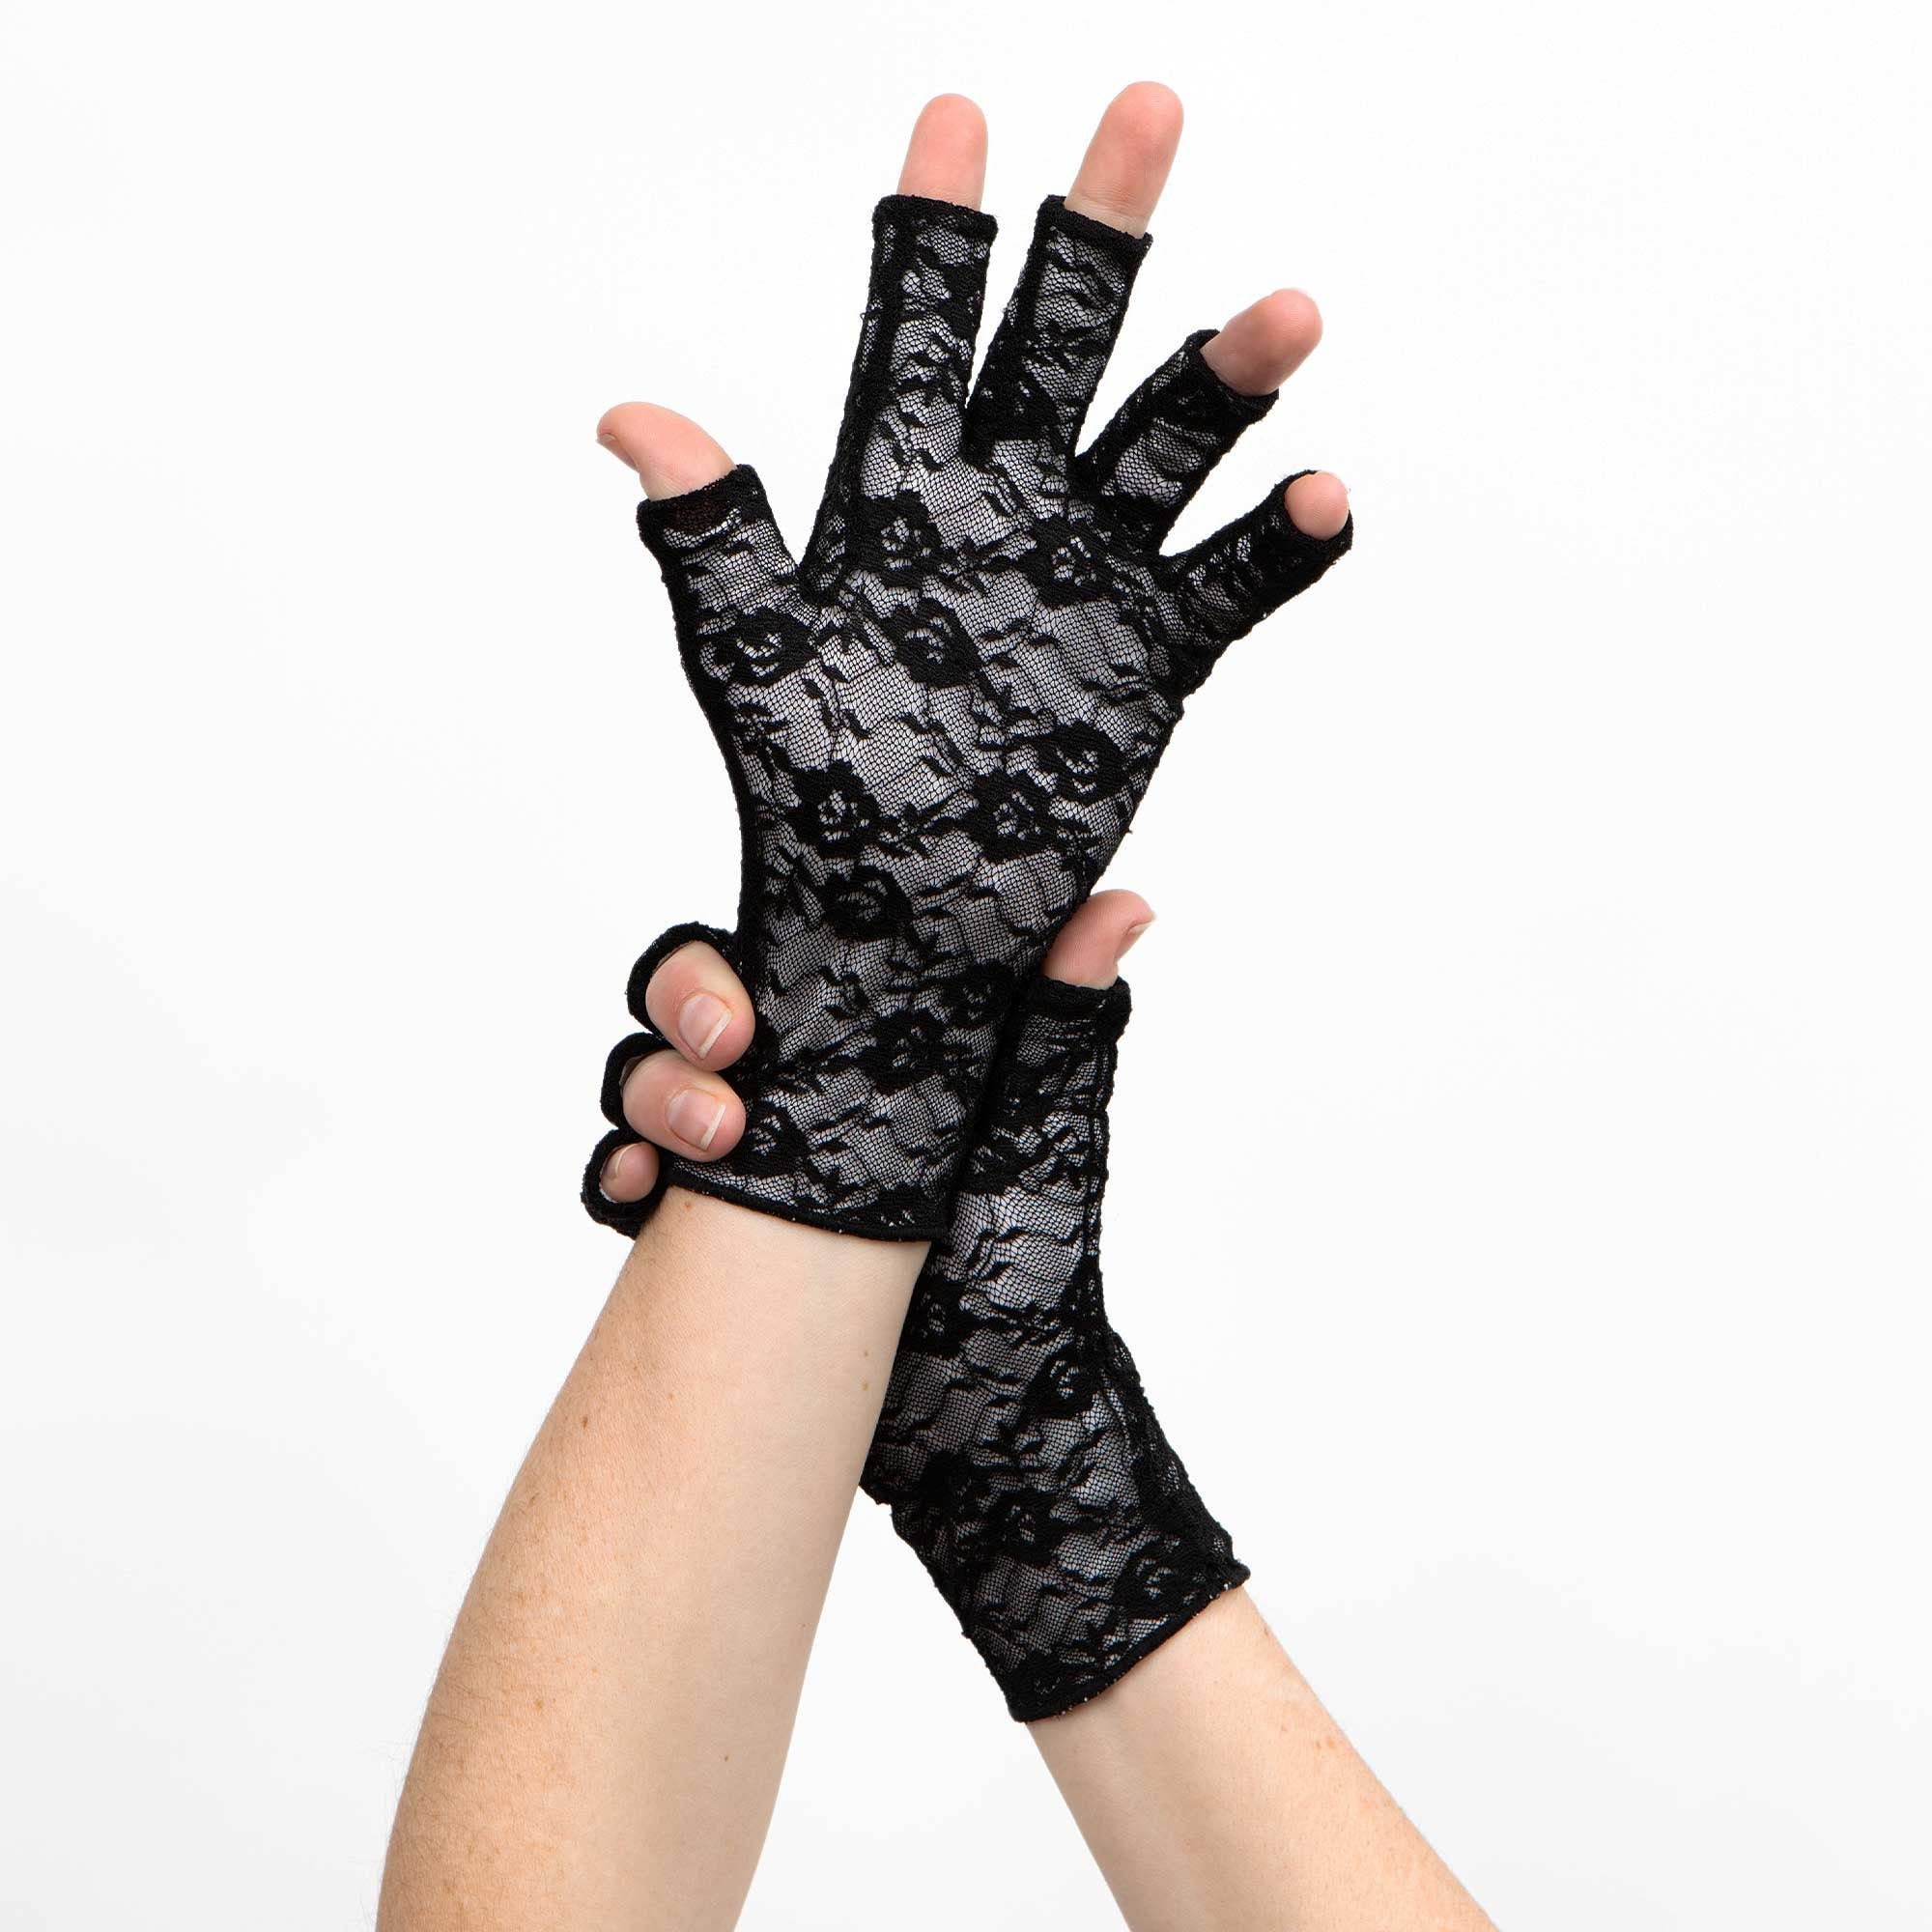 Texting Gloves Arthritis Gloves Compression Gloves Driving Gloves Fingerless Gloves for Women Arthritis Relief Accessoires Handschoenen & wanten Armwarmers Falling Leaves 